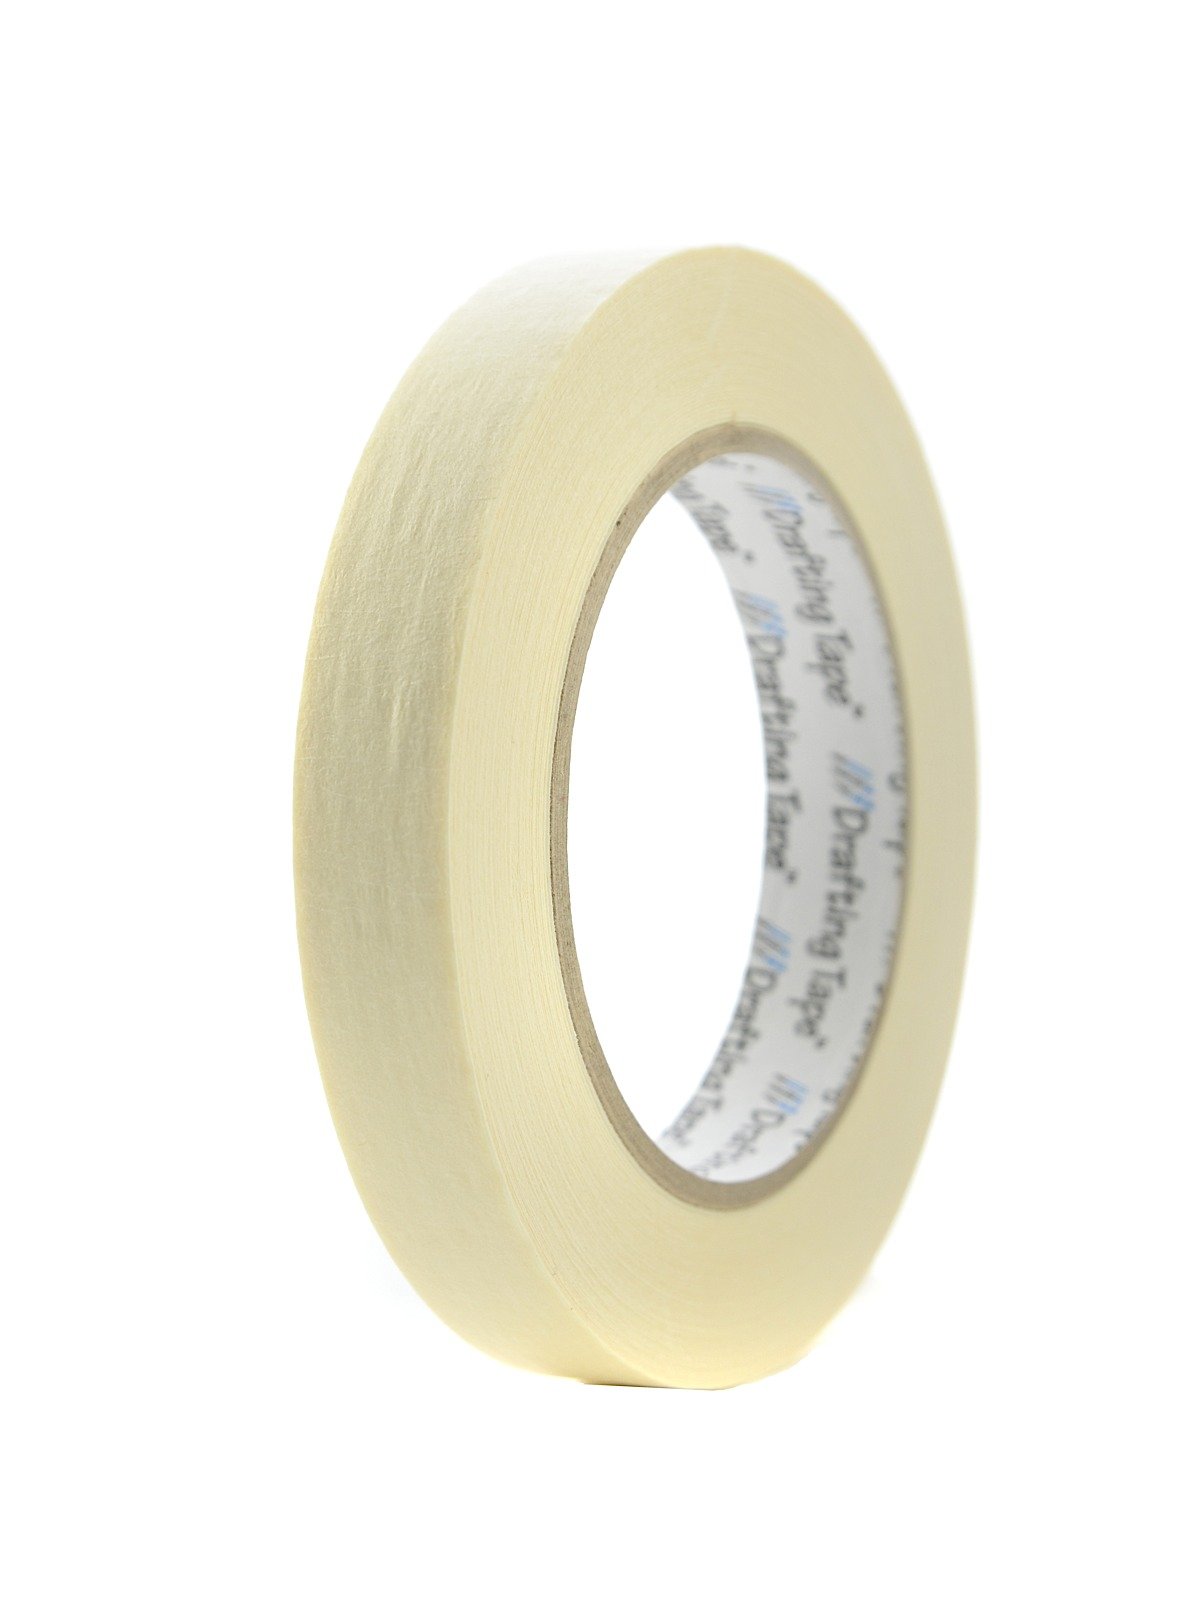 Buy Strong Efficient Authentic drafting tape 